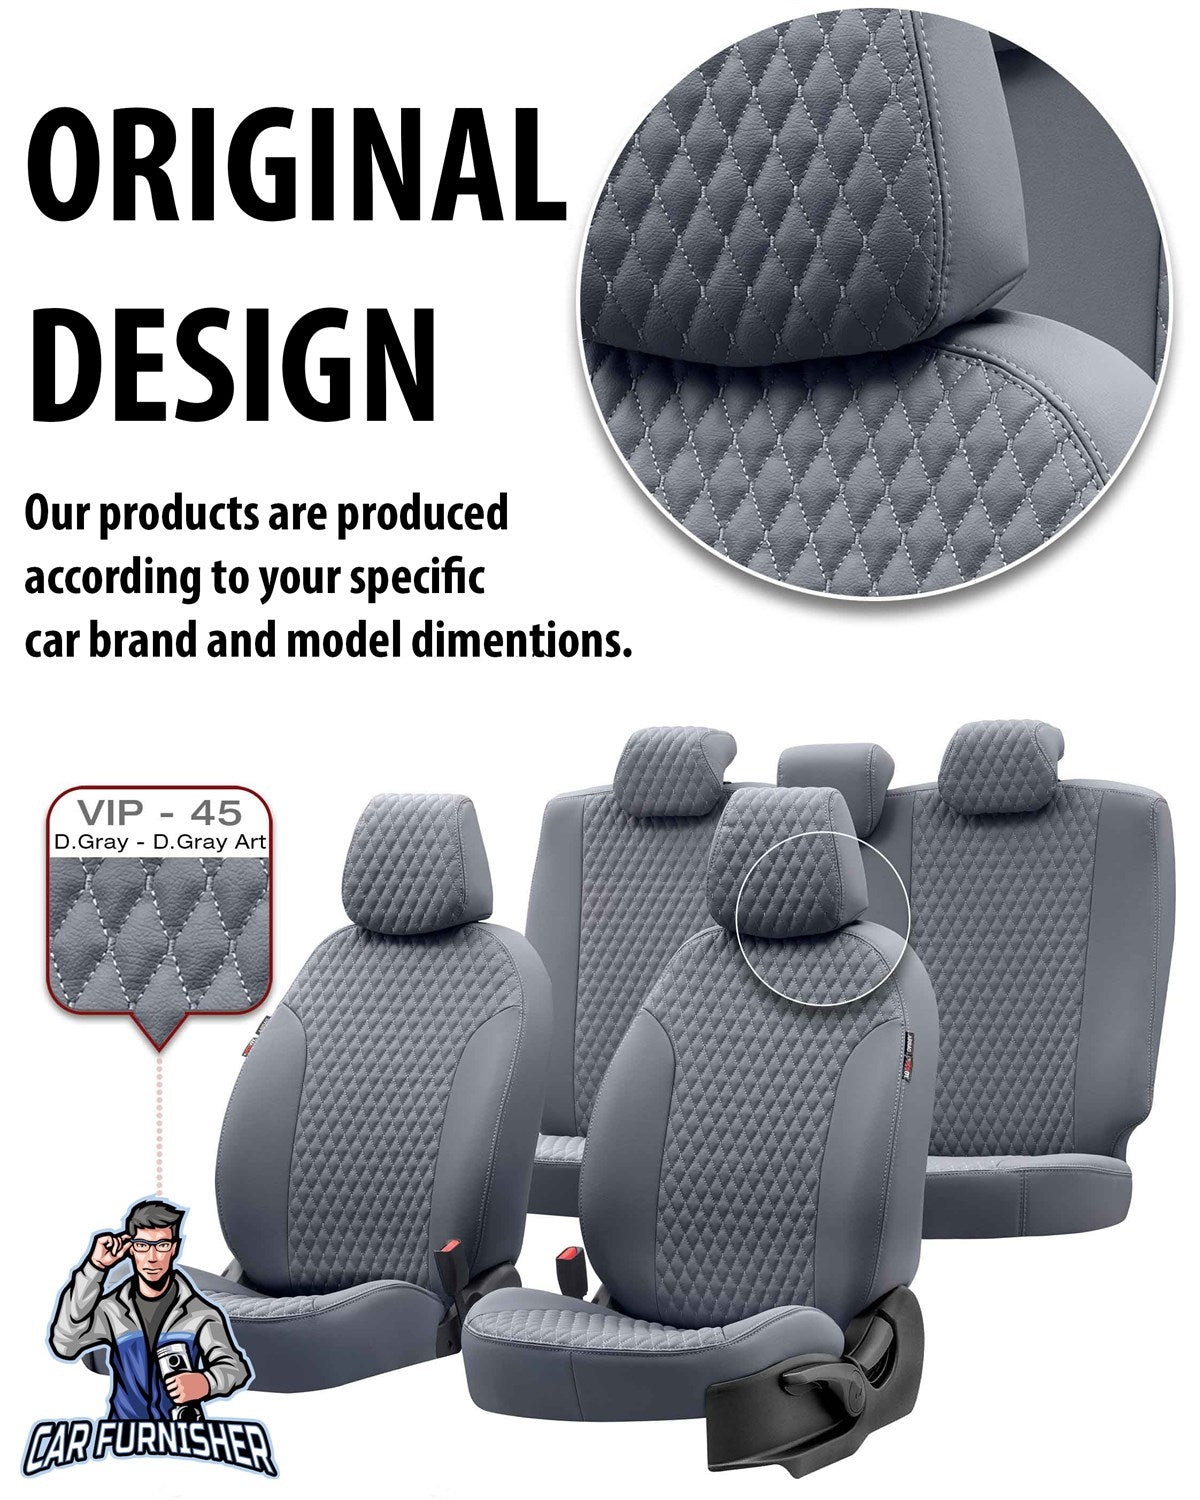 Citroen C3 Car Seat Covers 2002-2023 Aircross/Picasso Amsterdam Black Full Leather